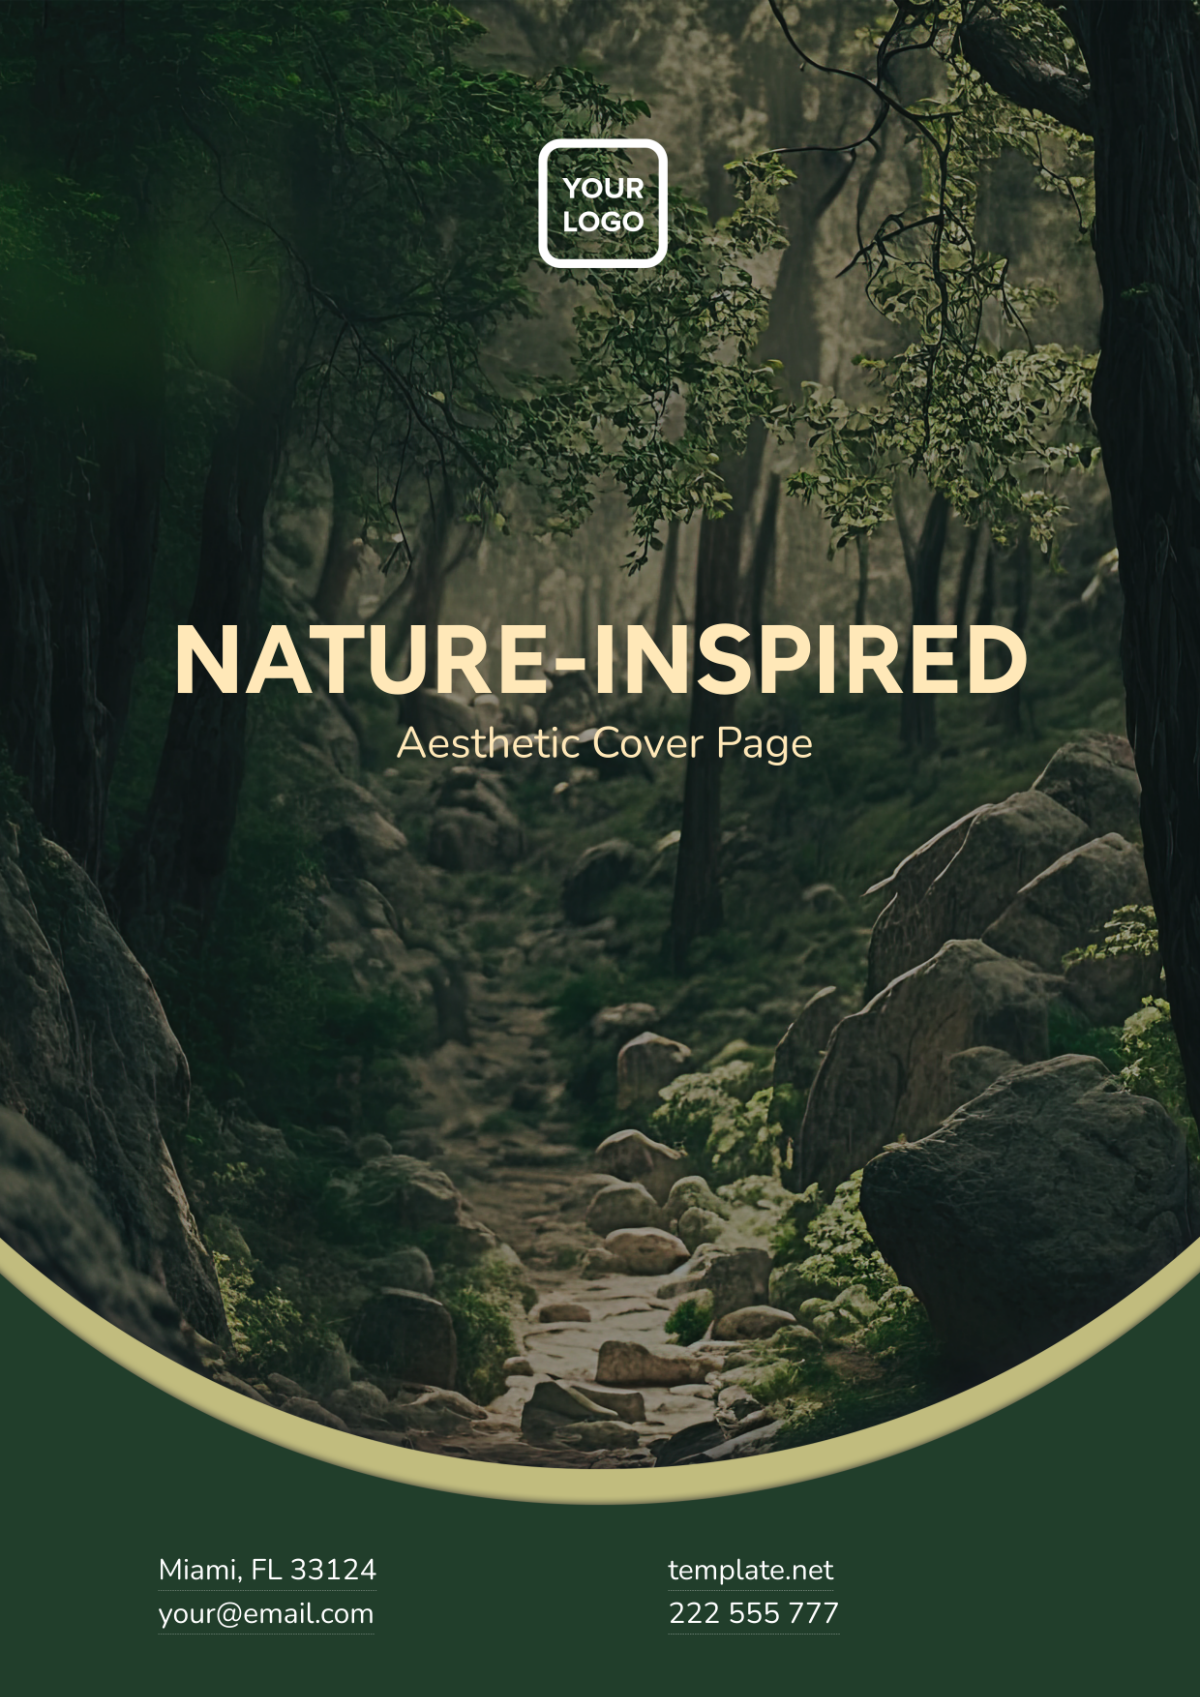 Nature-Inspired Aesthetic Cover Page